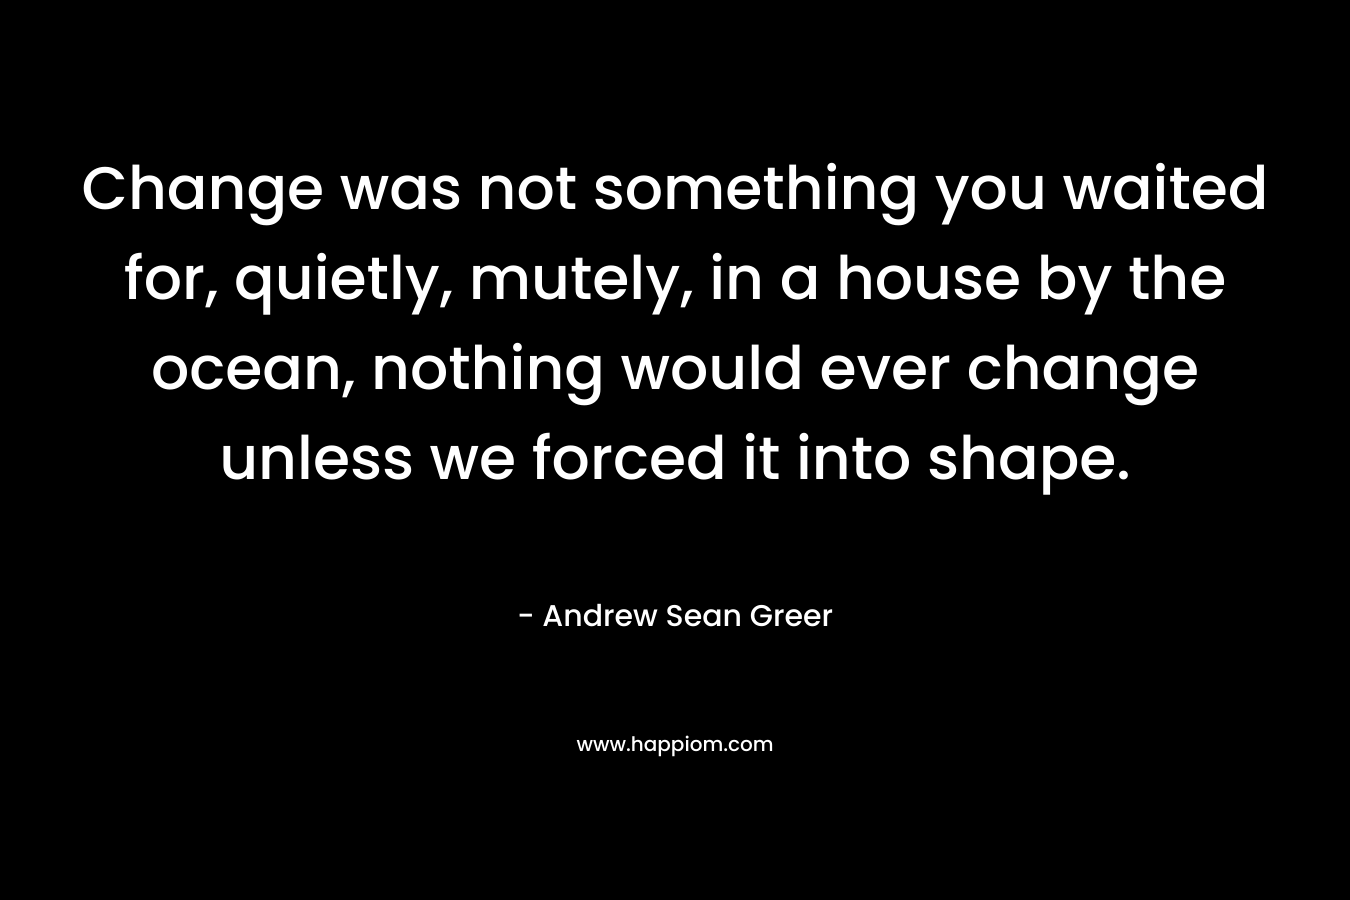 Change was not something you waited for, quietly, mutely, in a house by the ocean, nothing would ever change unless we forced it into shape.